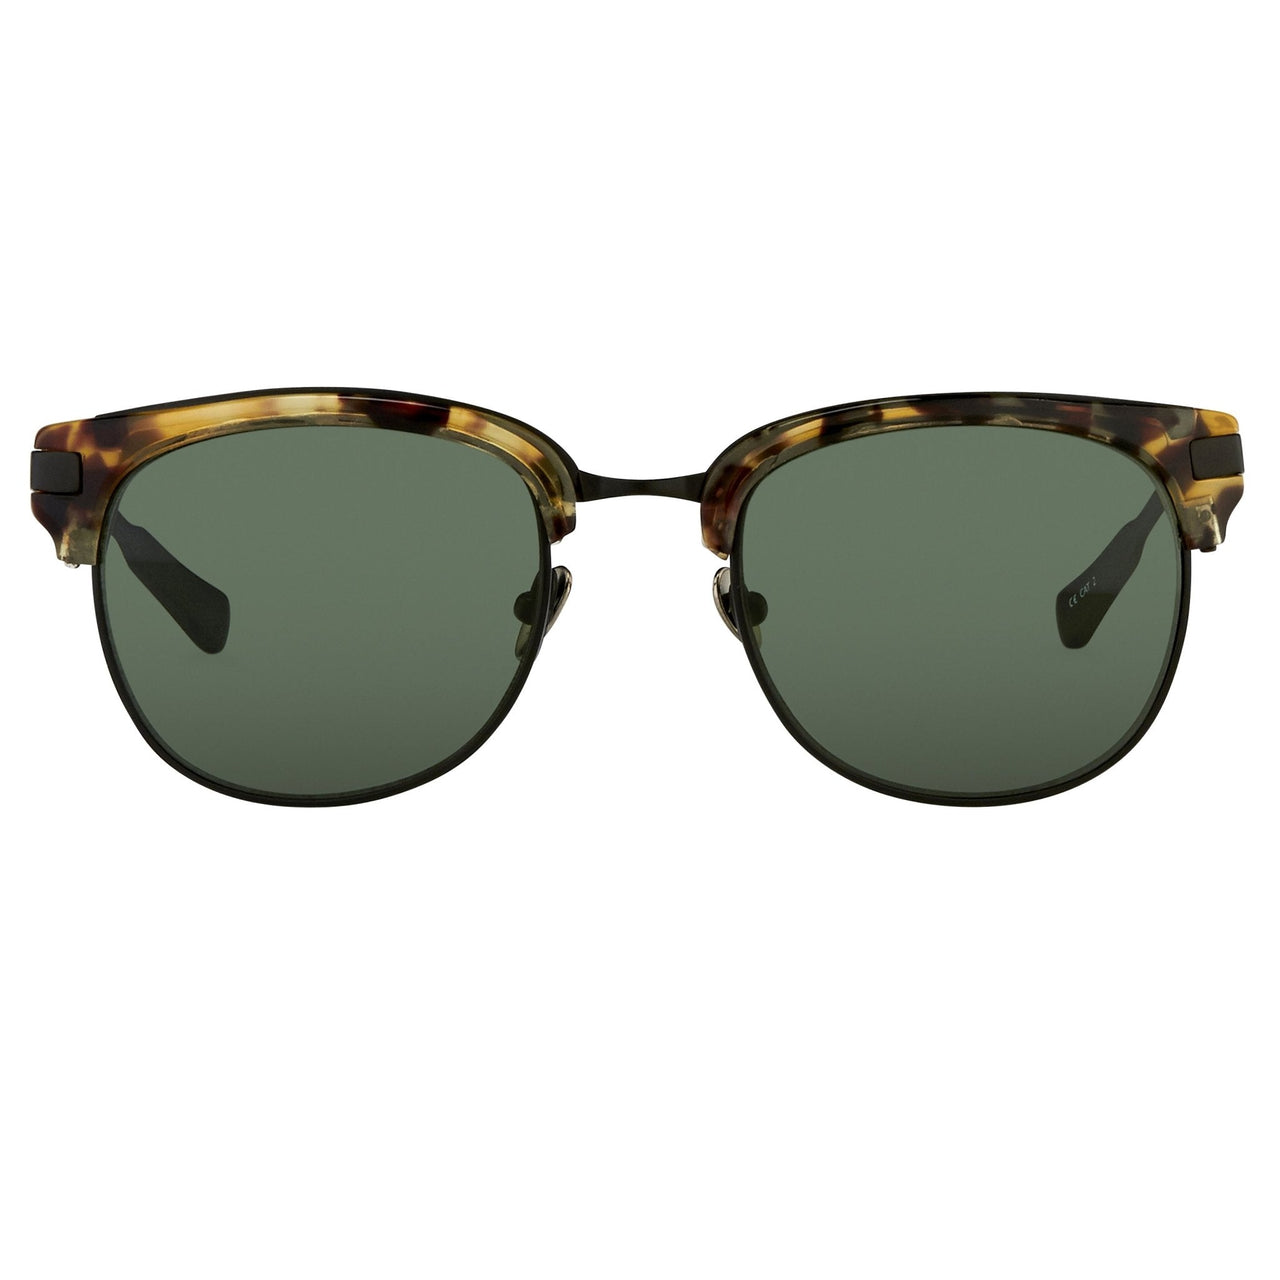 Kris Van Assche Sunglasses with D-Frame Tortoiseshell Black and Green Lenses Category 3 - KVA76C2SUN - Watches & Crystals